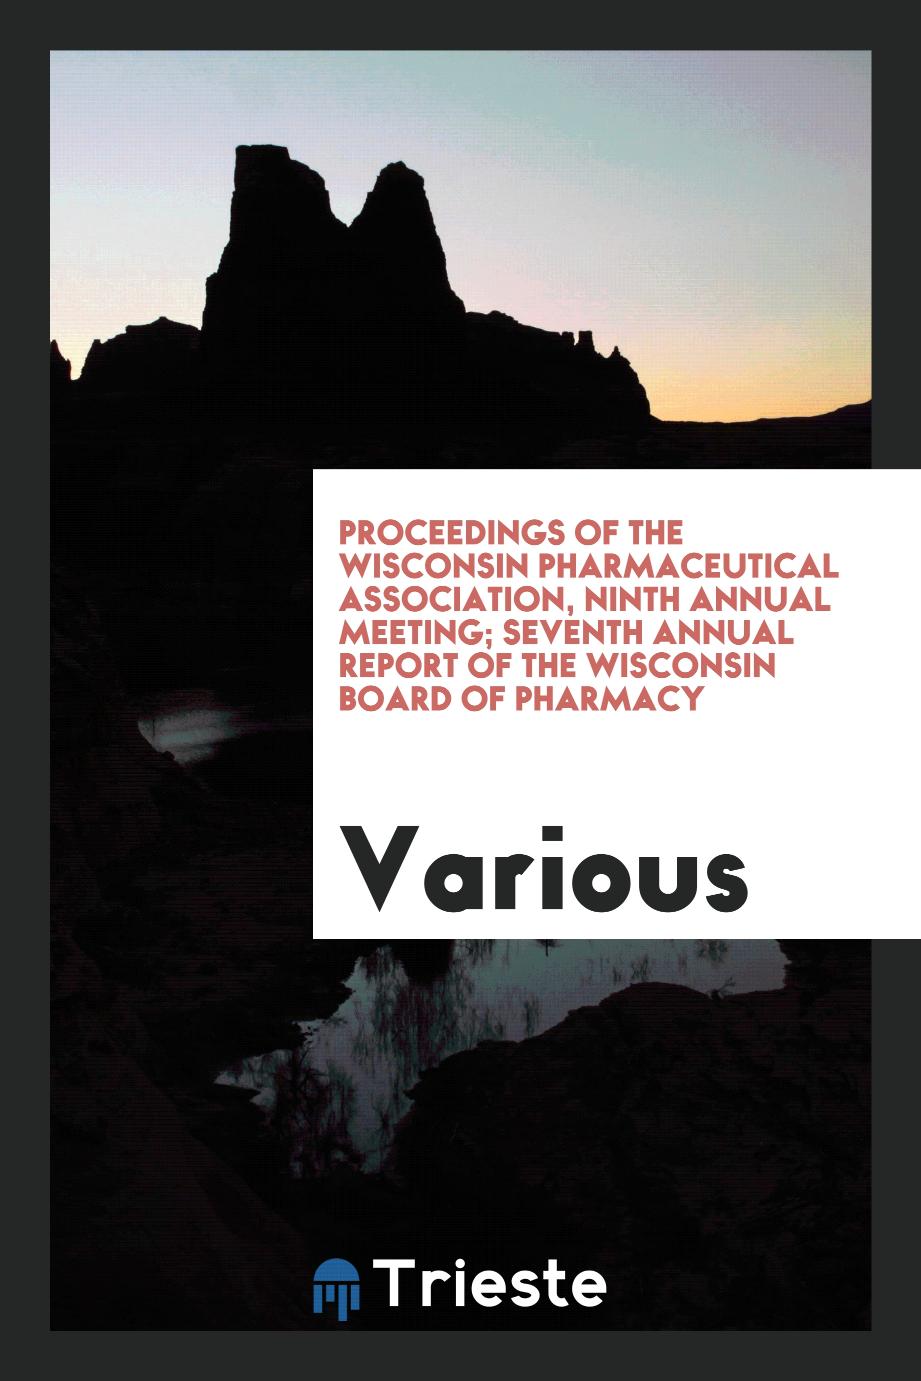 Proceedings of the Wisconsin Pharmaceutical Association, Ninth Annual Meeting; Seventh Annual Report of the Wisconsin Board of Pharmacy